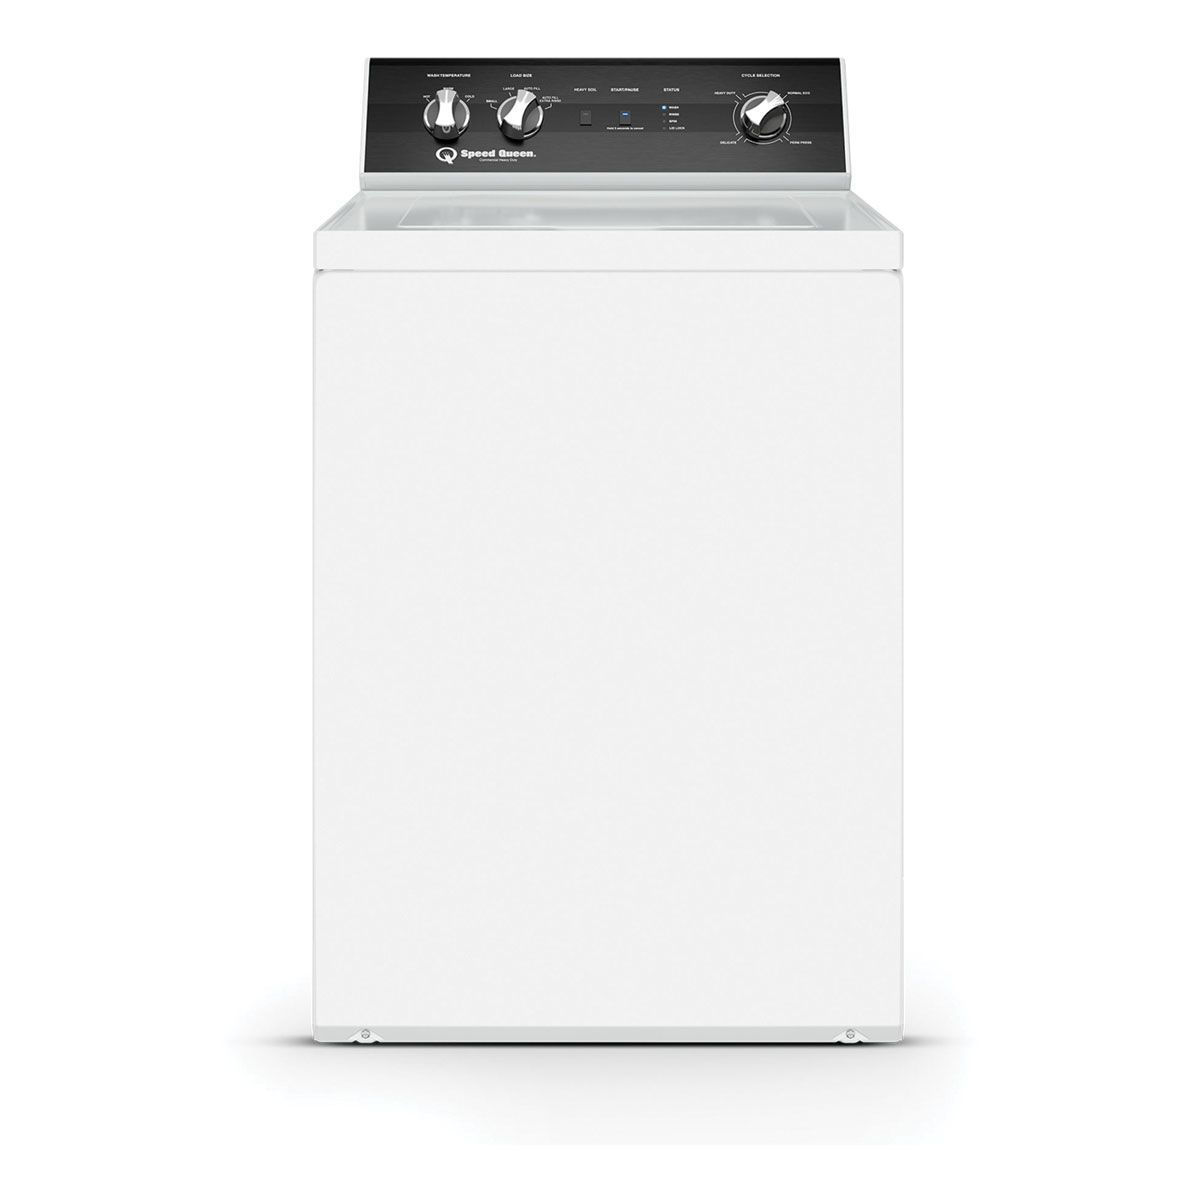 Speed Queen TR5003WN Top Load Washer - White